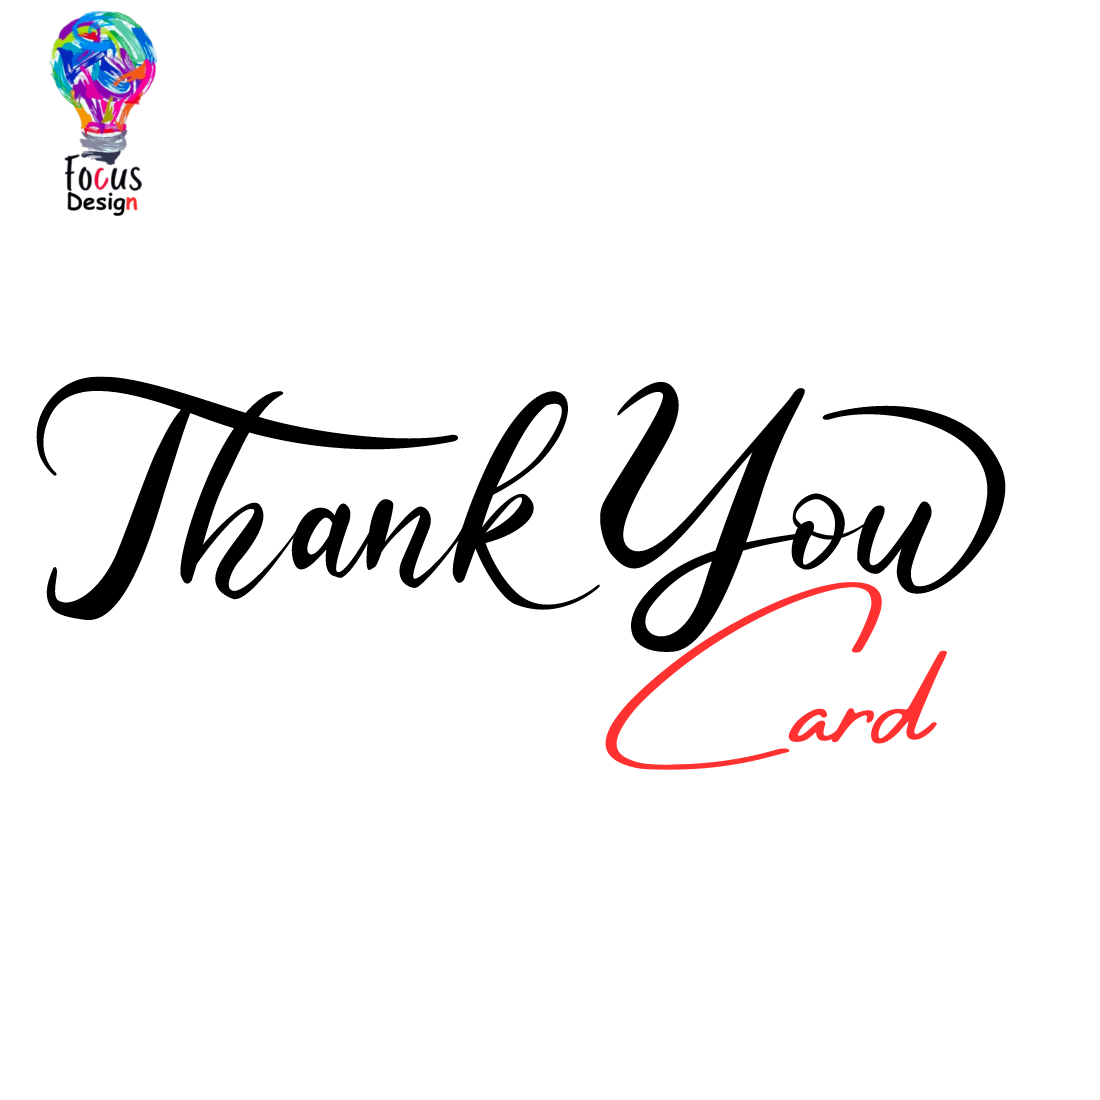 Thank you cards for occasions preview image.